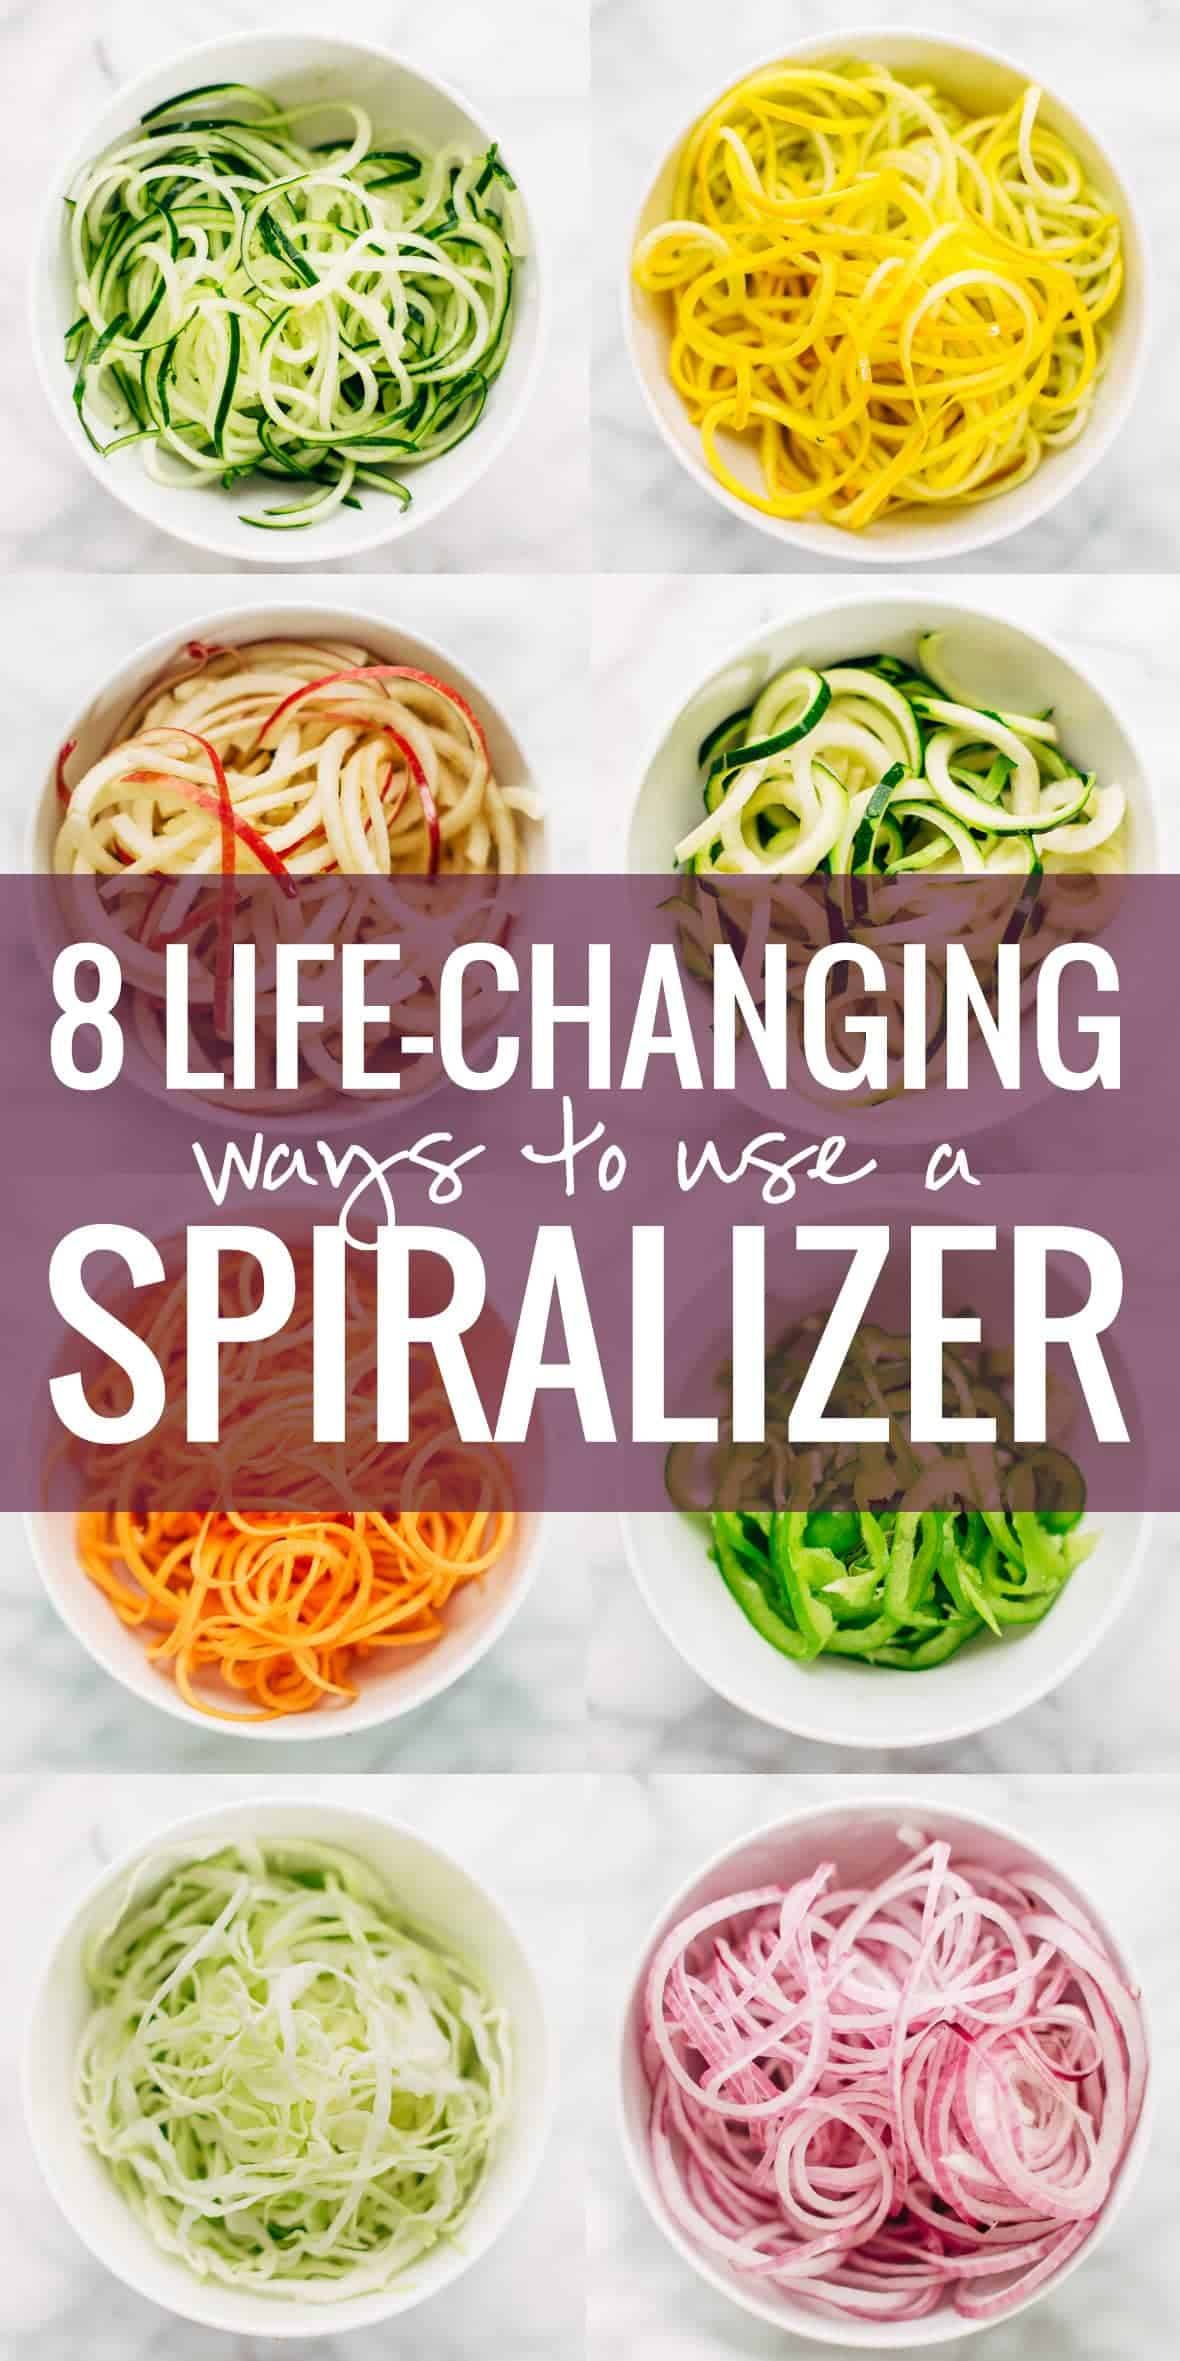 Ways to use a spiralizer collage.